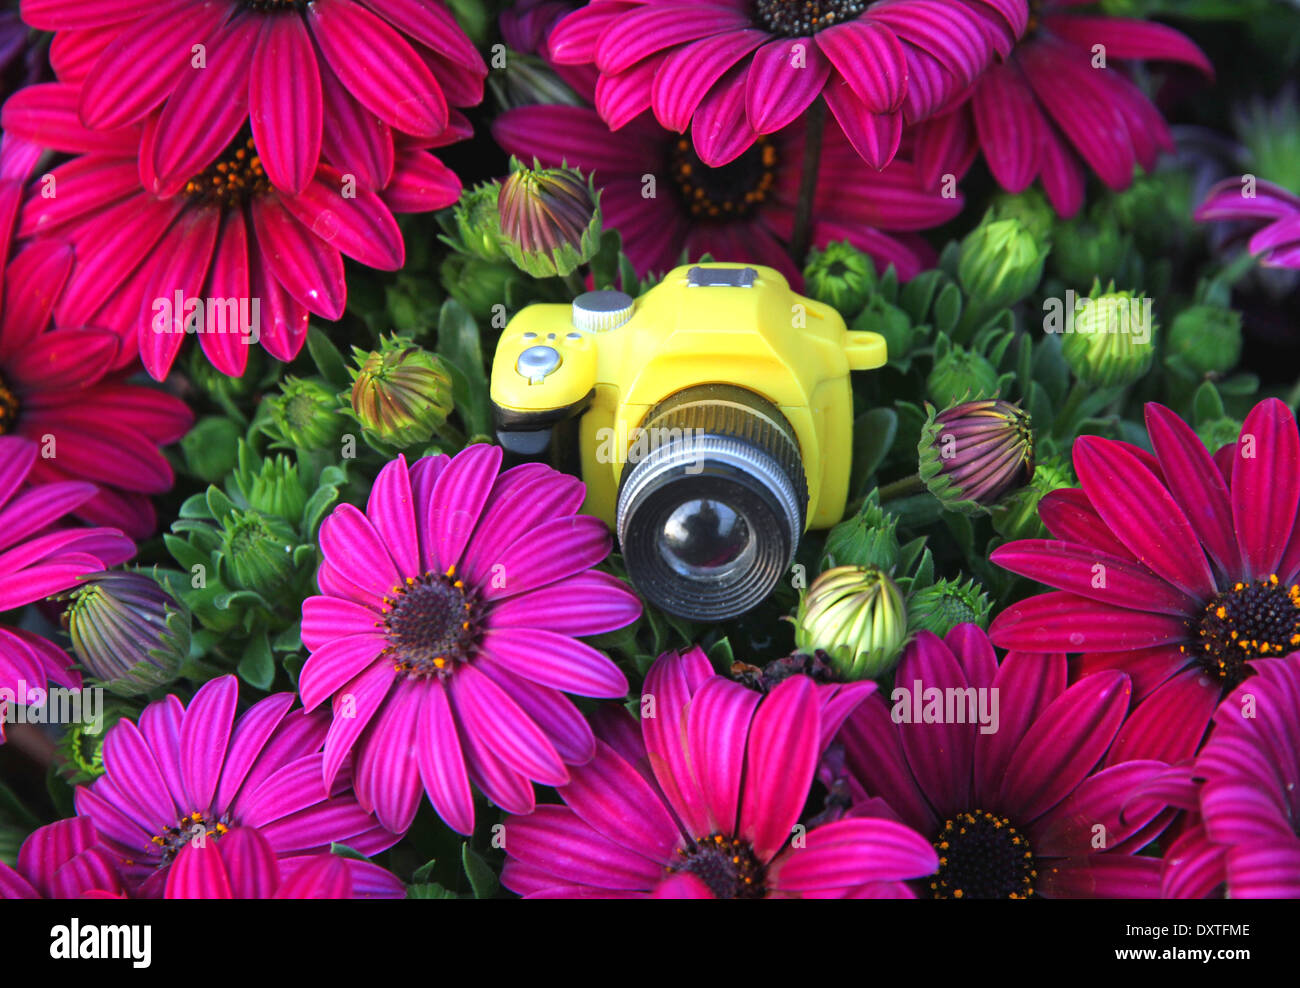 small yellow toy camera amid the purple flowers Stock Photo